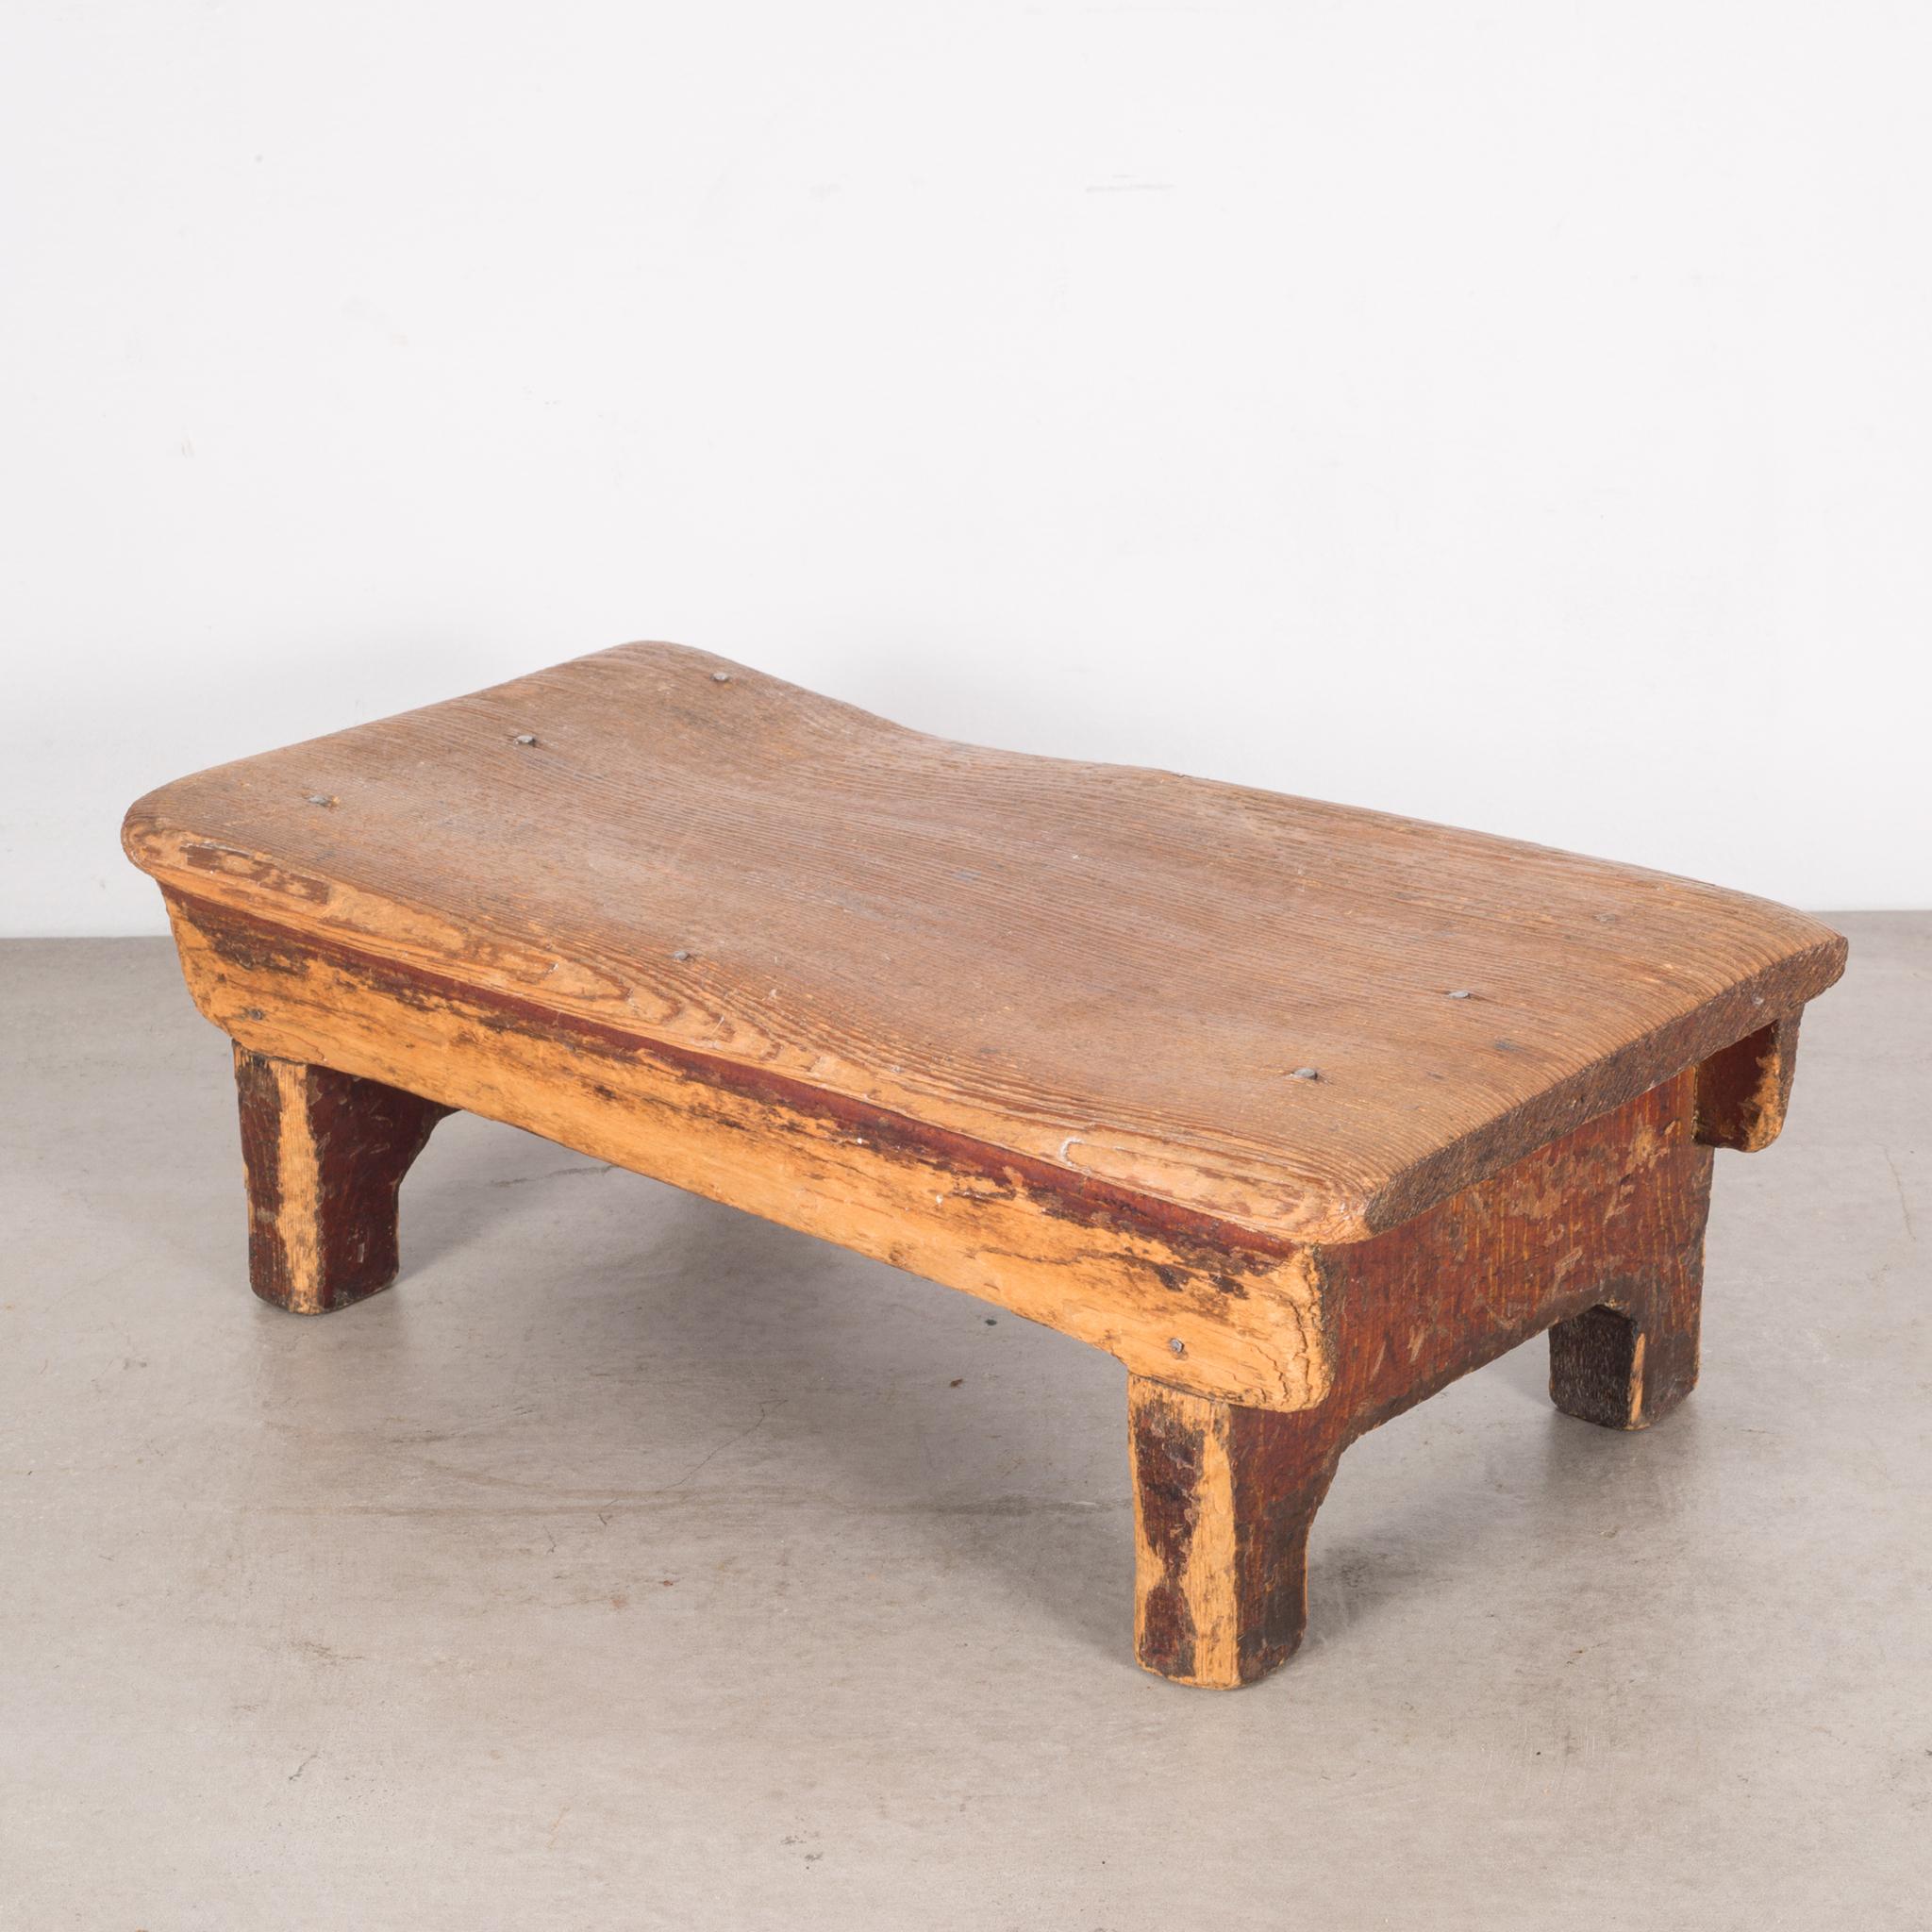 About

A small handmade draftsman's footrest from the workshop of the Southern Pacific Railway building in San Francisco. This piece could be used as a riser for objects or plants.

 Creator: Southern Pacific Railway, California.
Date of